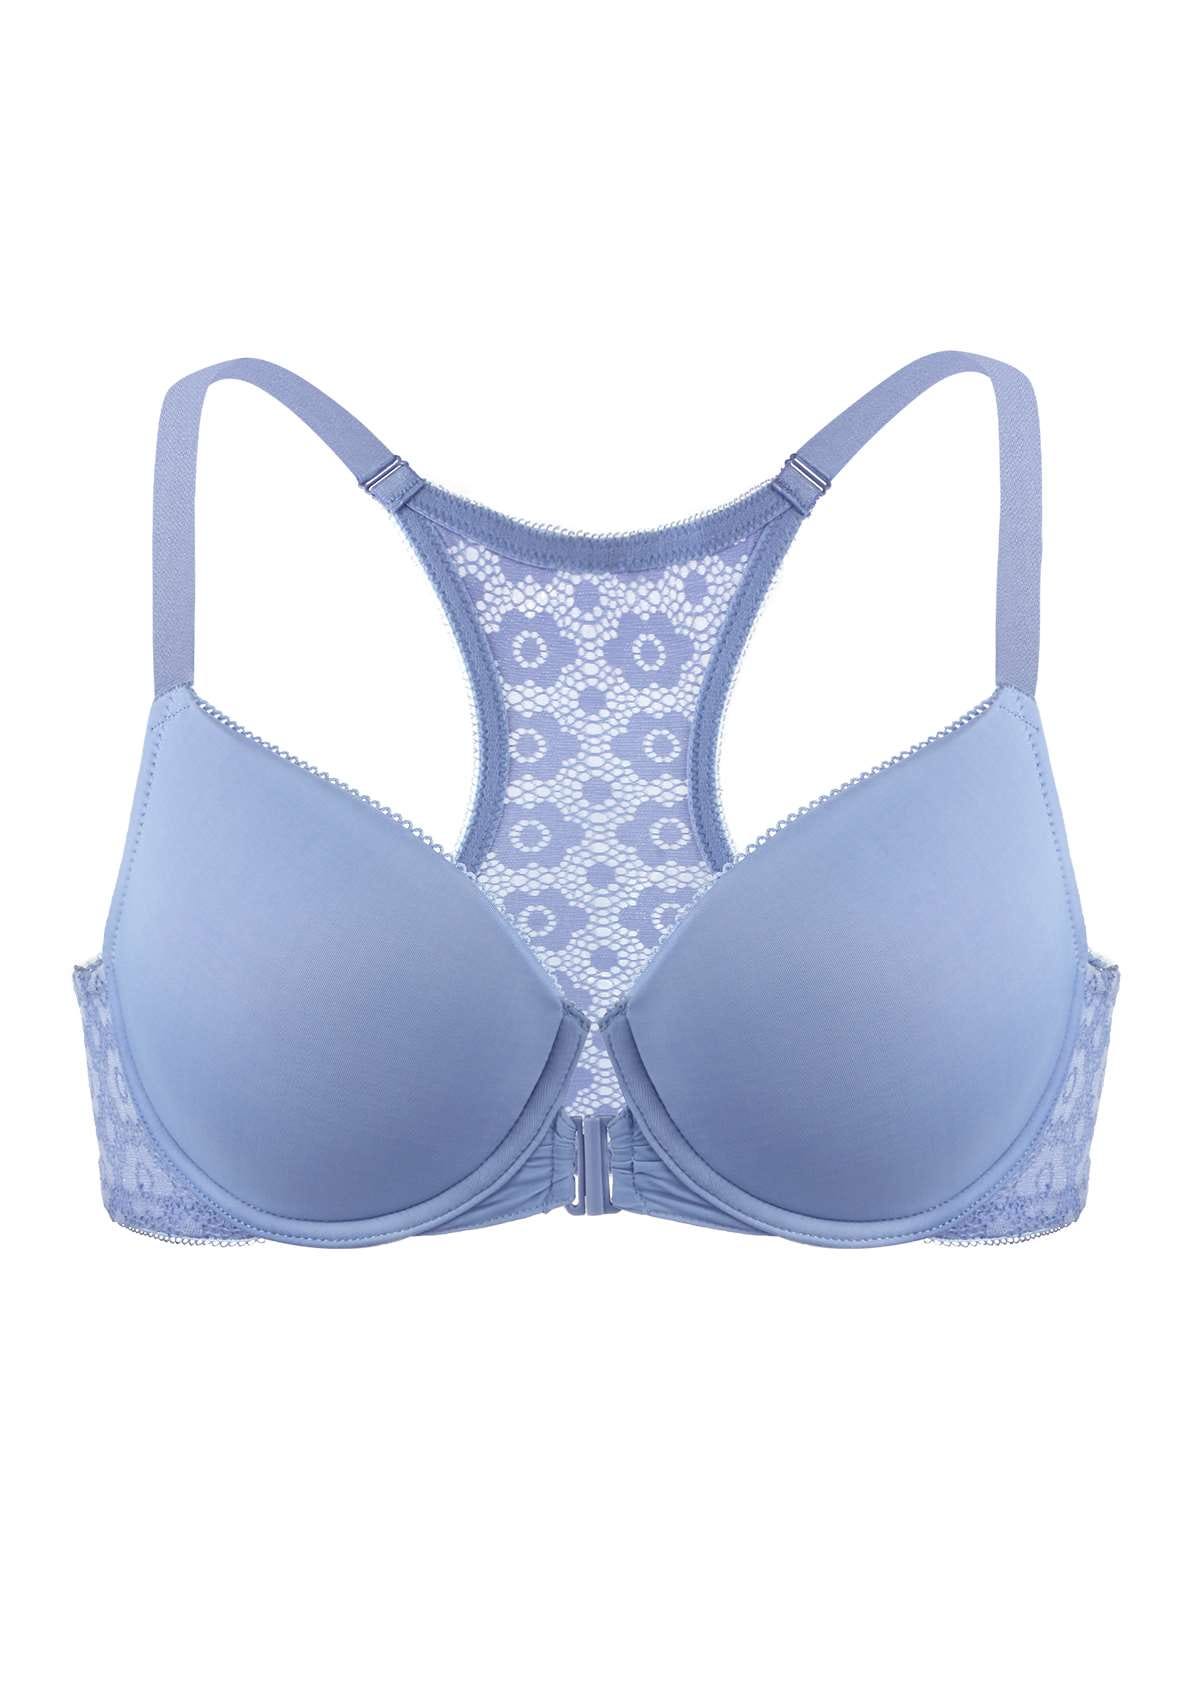 Bras for Narrow Shoulders: Finding Styles that Stay in Place